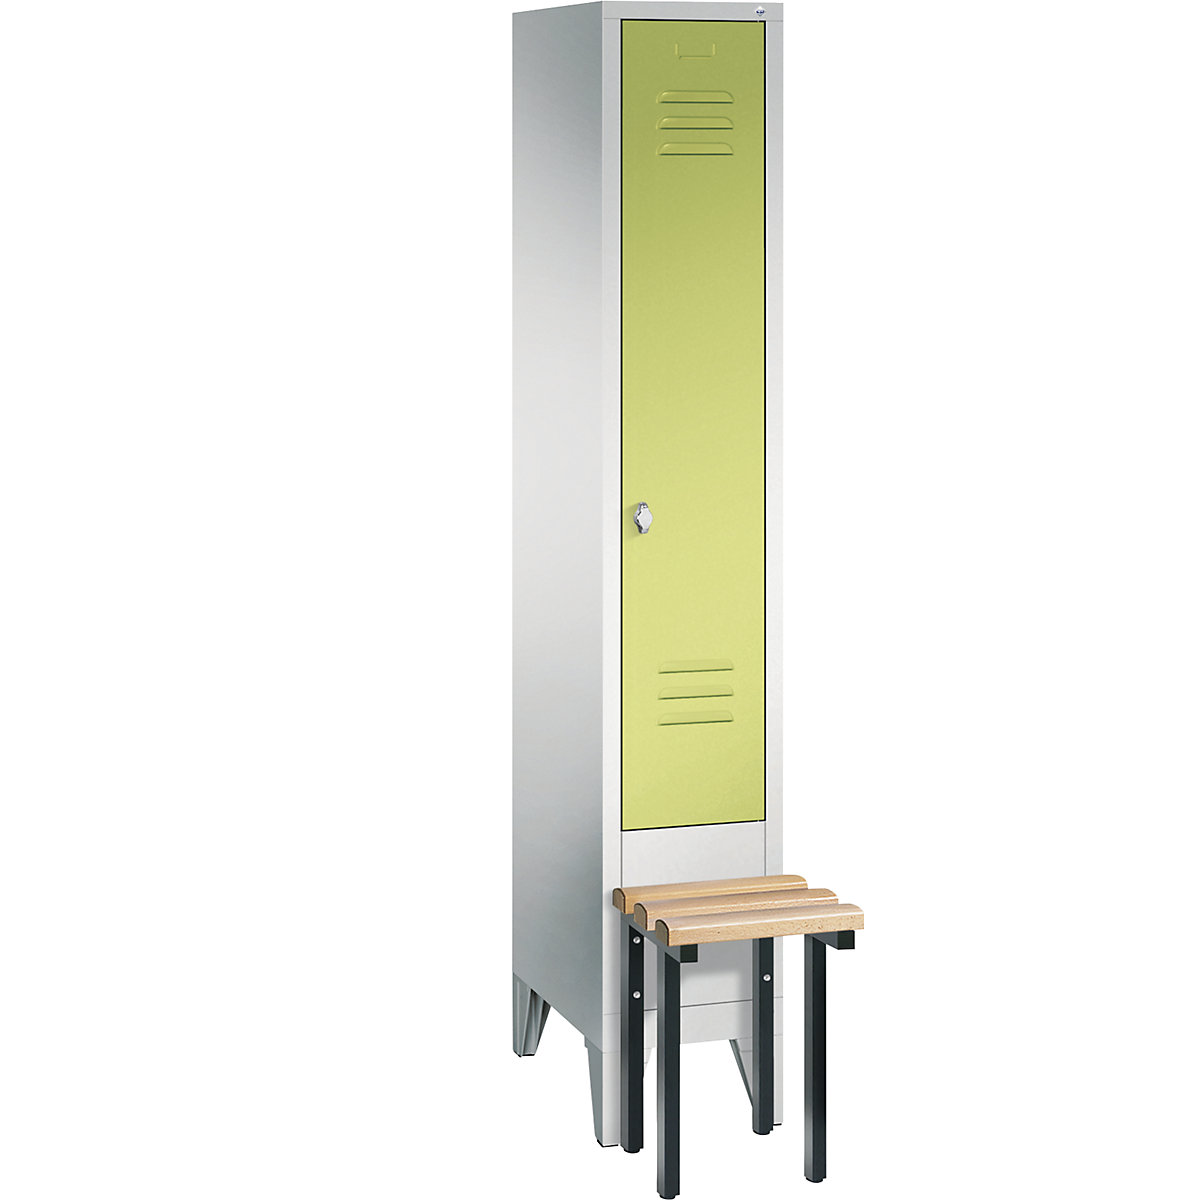 CLASSIC cloakroom locker with bench mounted in front – C+P, 1 compartment, compartment width 300 mm, light grey / viridian green-11